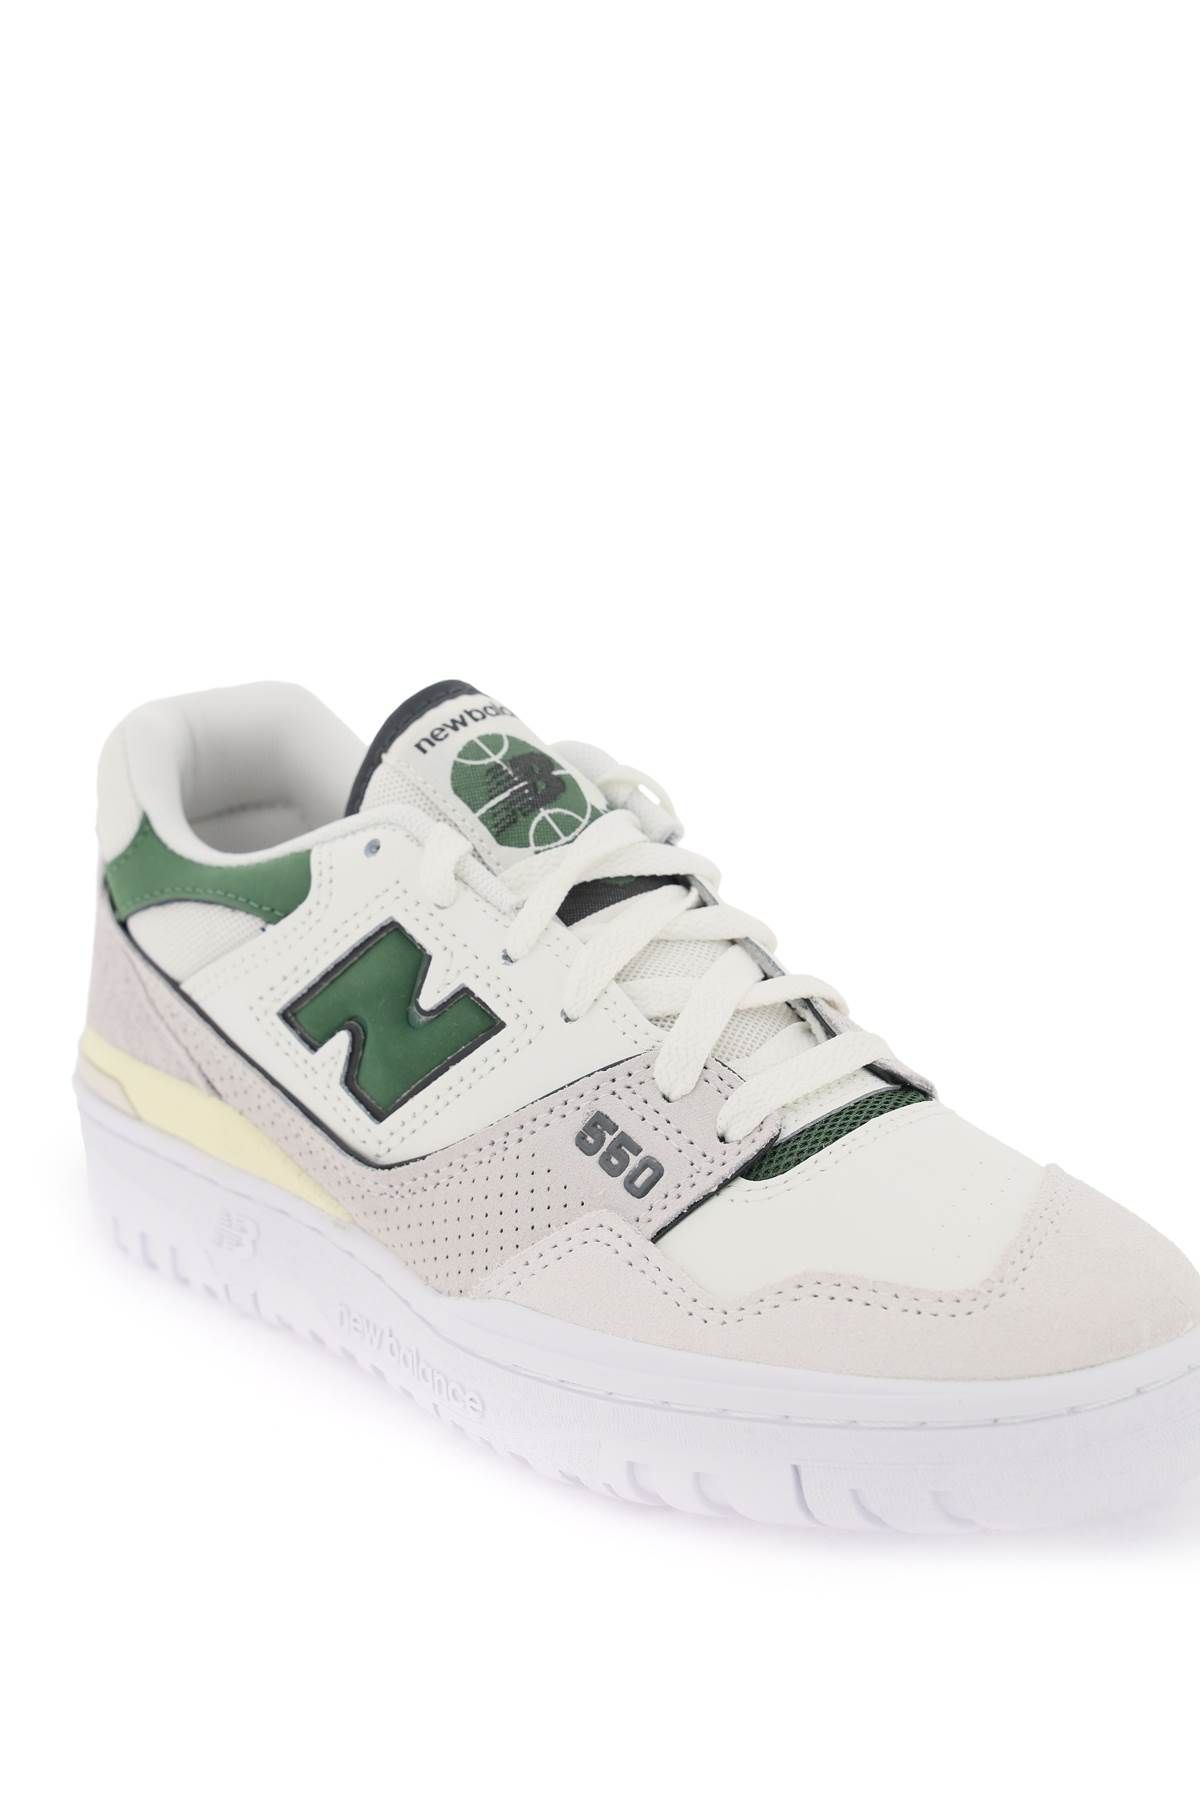 Shop New Balance 550 Sneakers In Beige,white,green